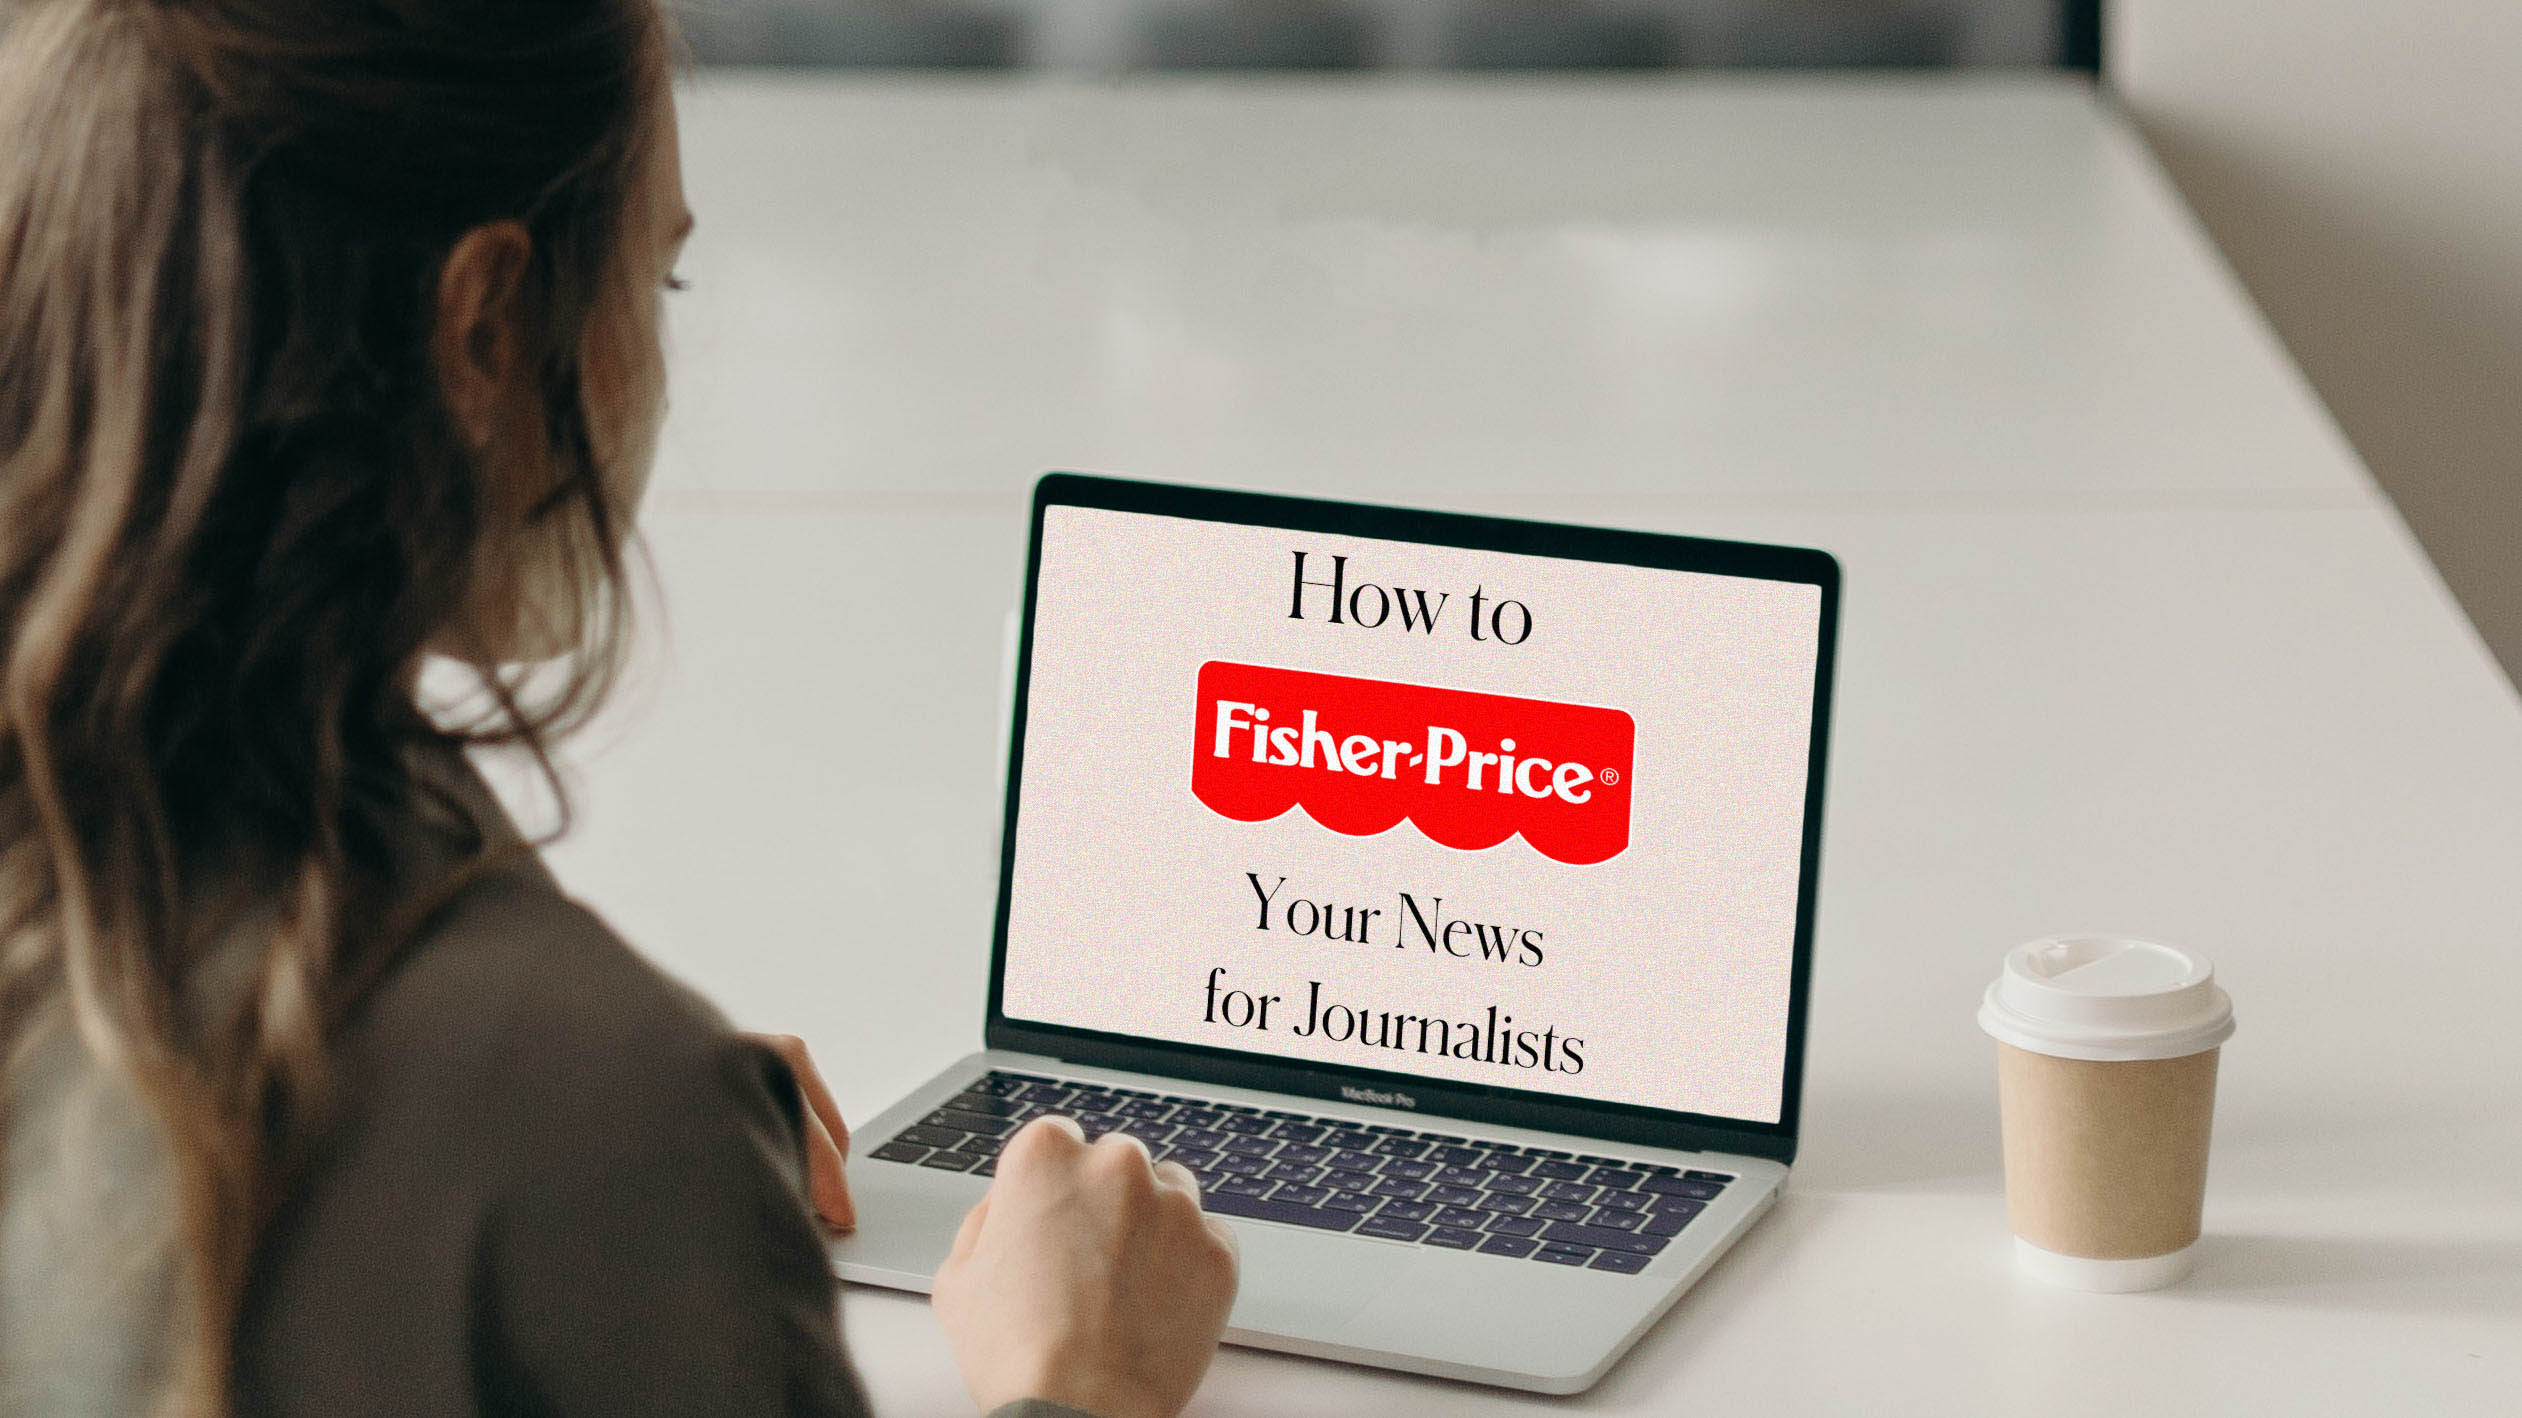 How to Fisher-Price Your News for Journalists